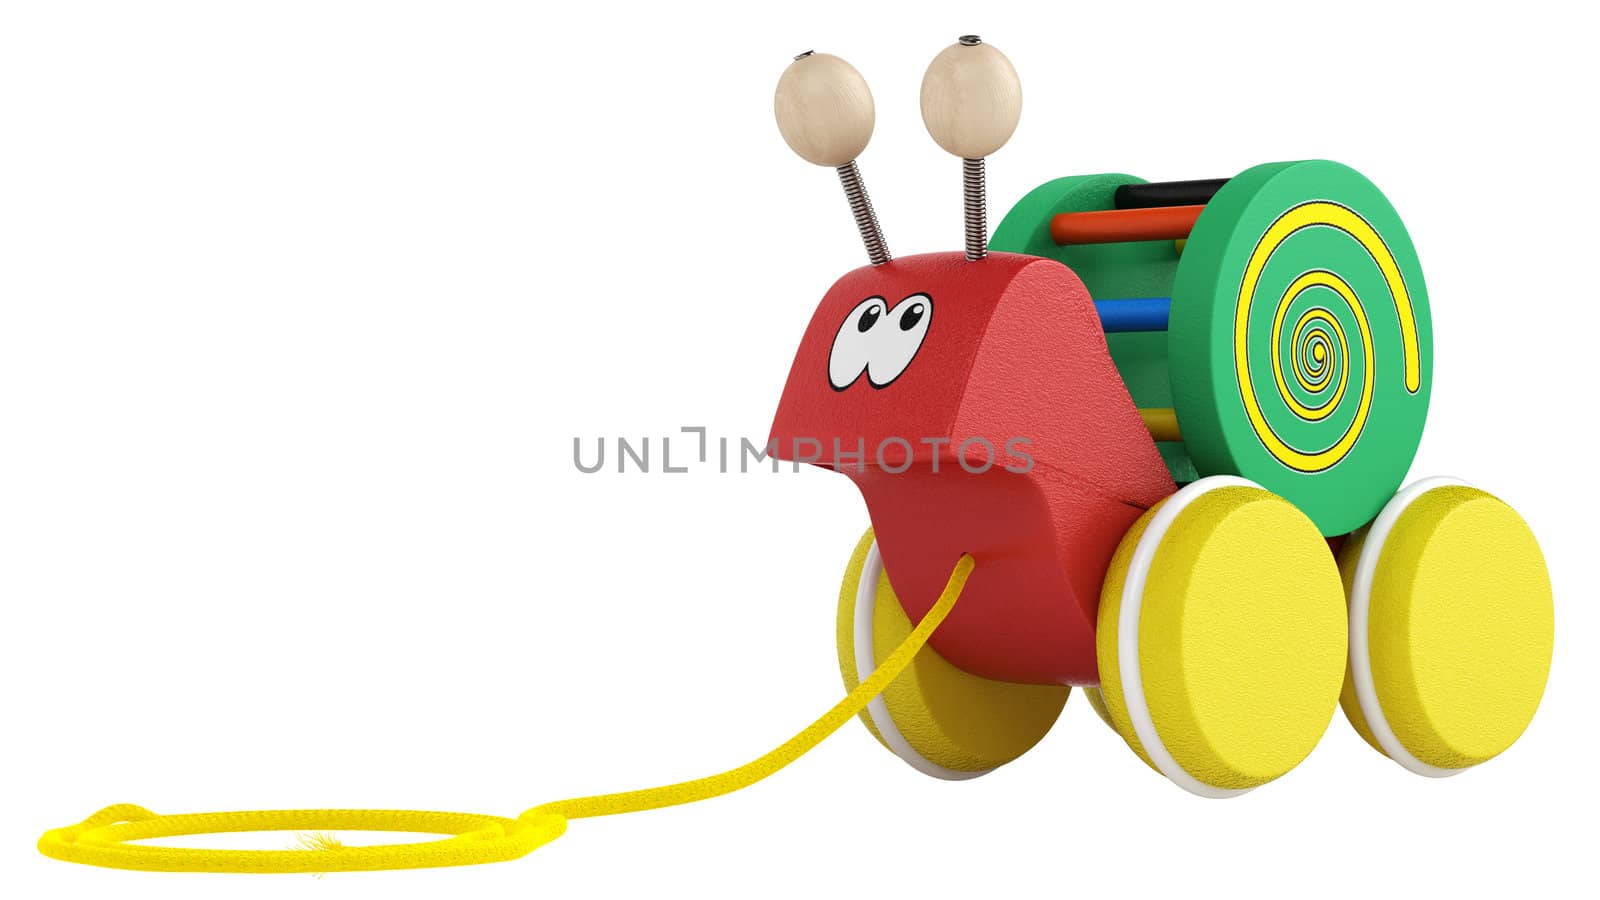 Fun wooden multicoloured cartoon snail toy on wheels with a string for pulling it along isolated on white